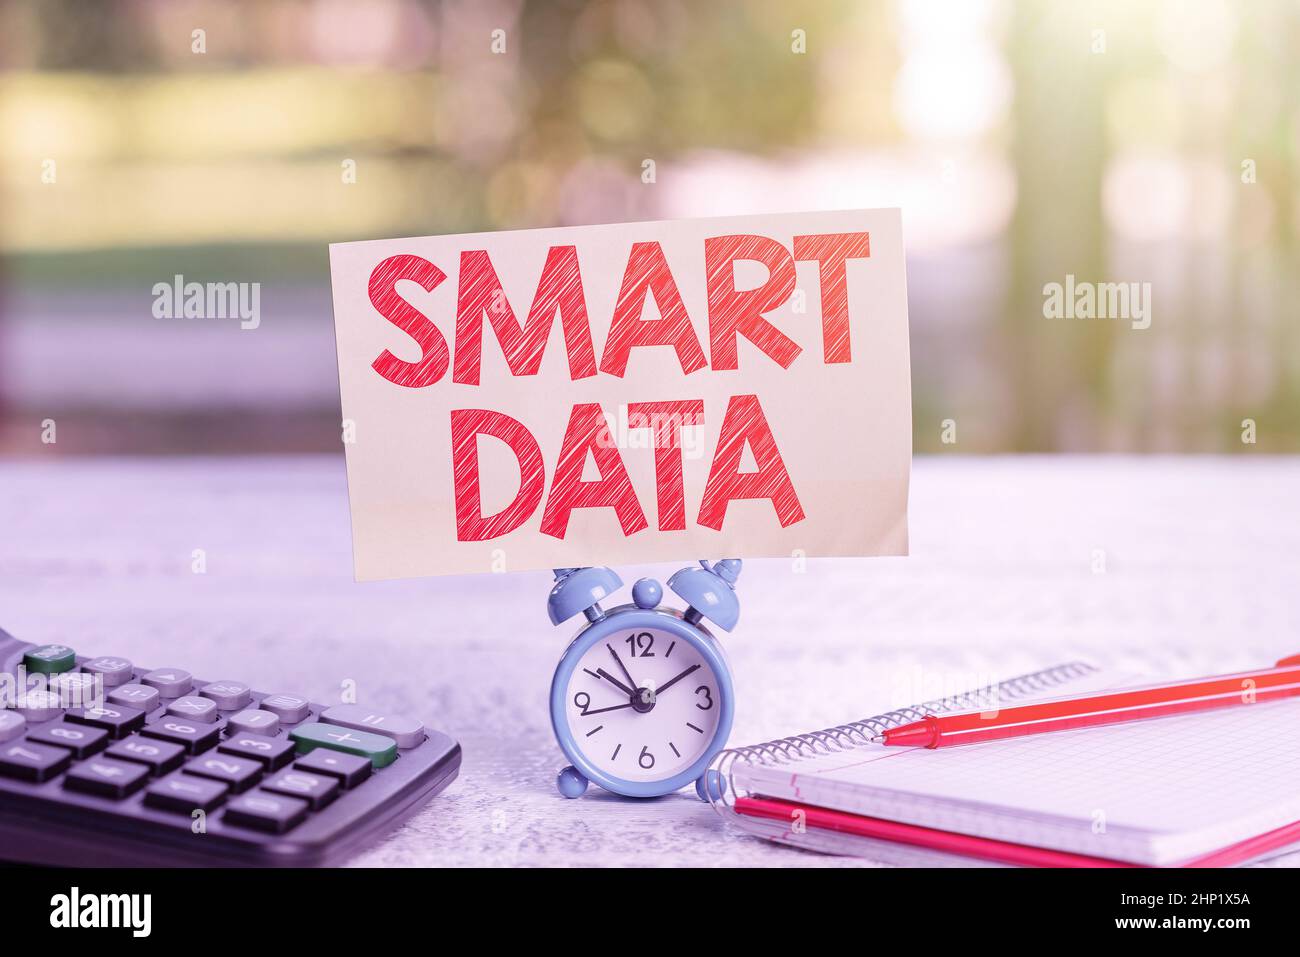 Handwriting text Smart Data, Internet Concept digital information that is formatted for further consolidation Presenting Time Management Skills, Worki Stock Photo